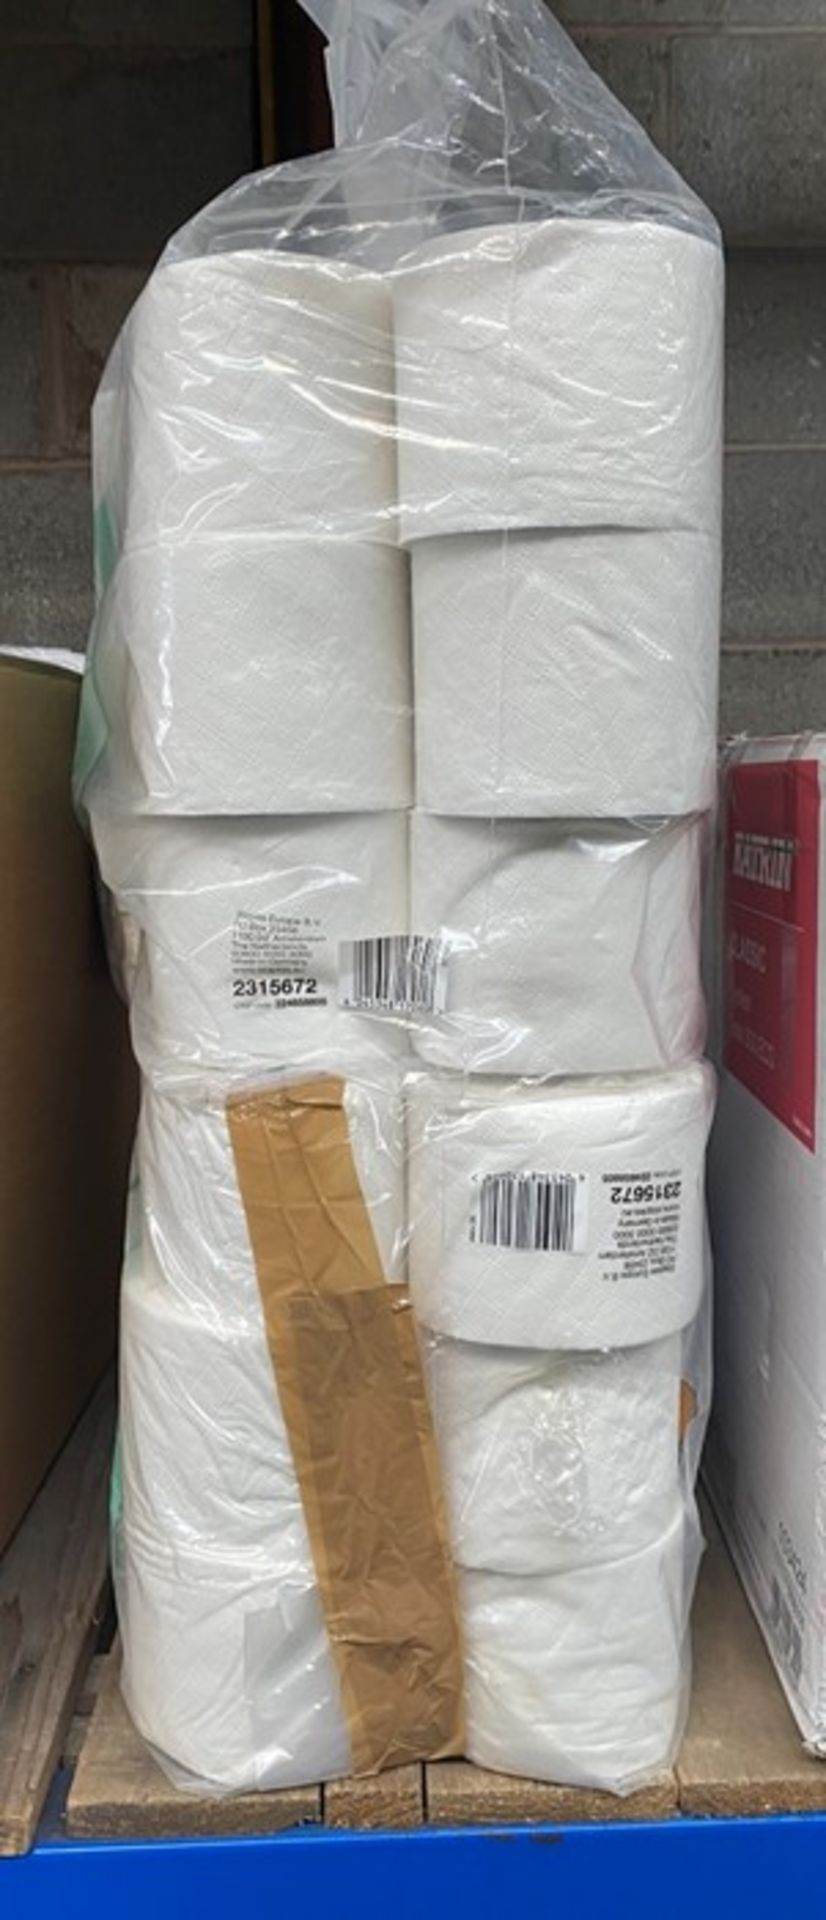 1 LOT TO CONTAIN 2 X 24 PACKS OF STAPLES TOILET PAPER